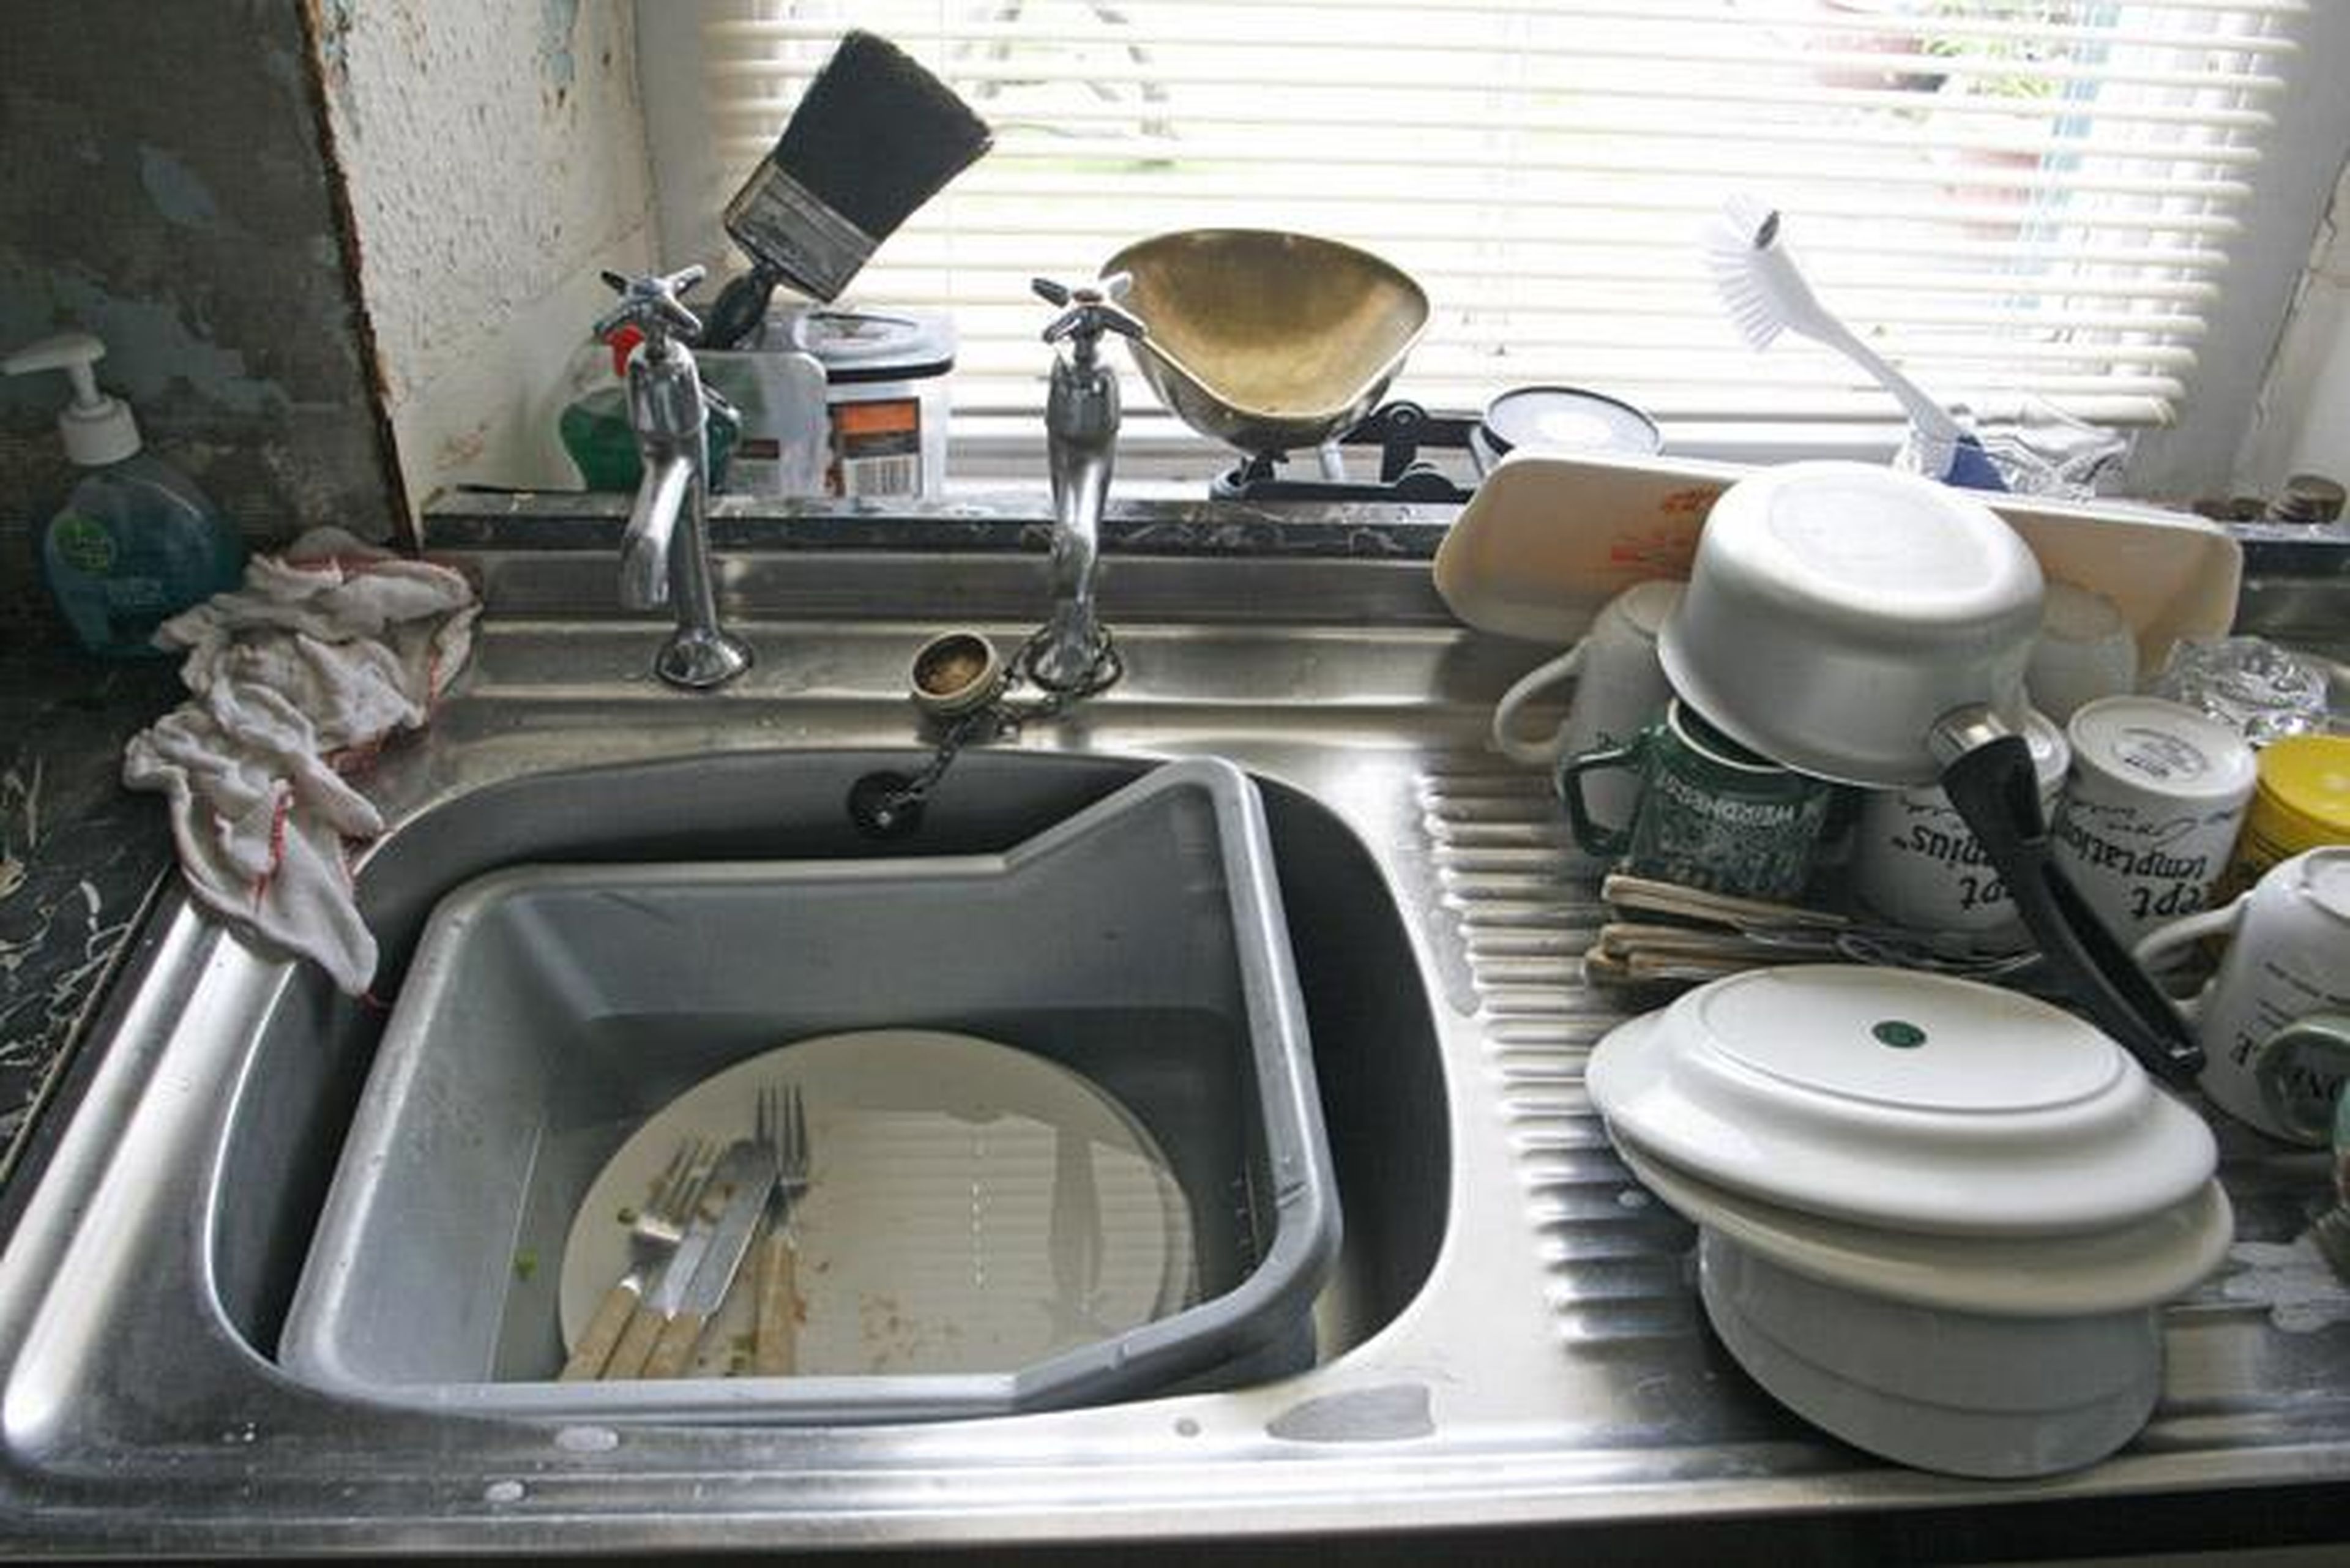 The kitchen sink is second only to the sponge when it comes to germs. Disinfect this basin once or twice per week, and immediately after you use it to handle raw meat.